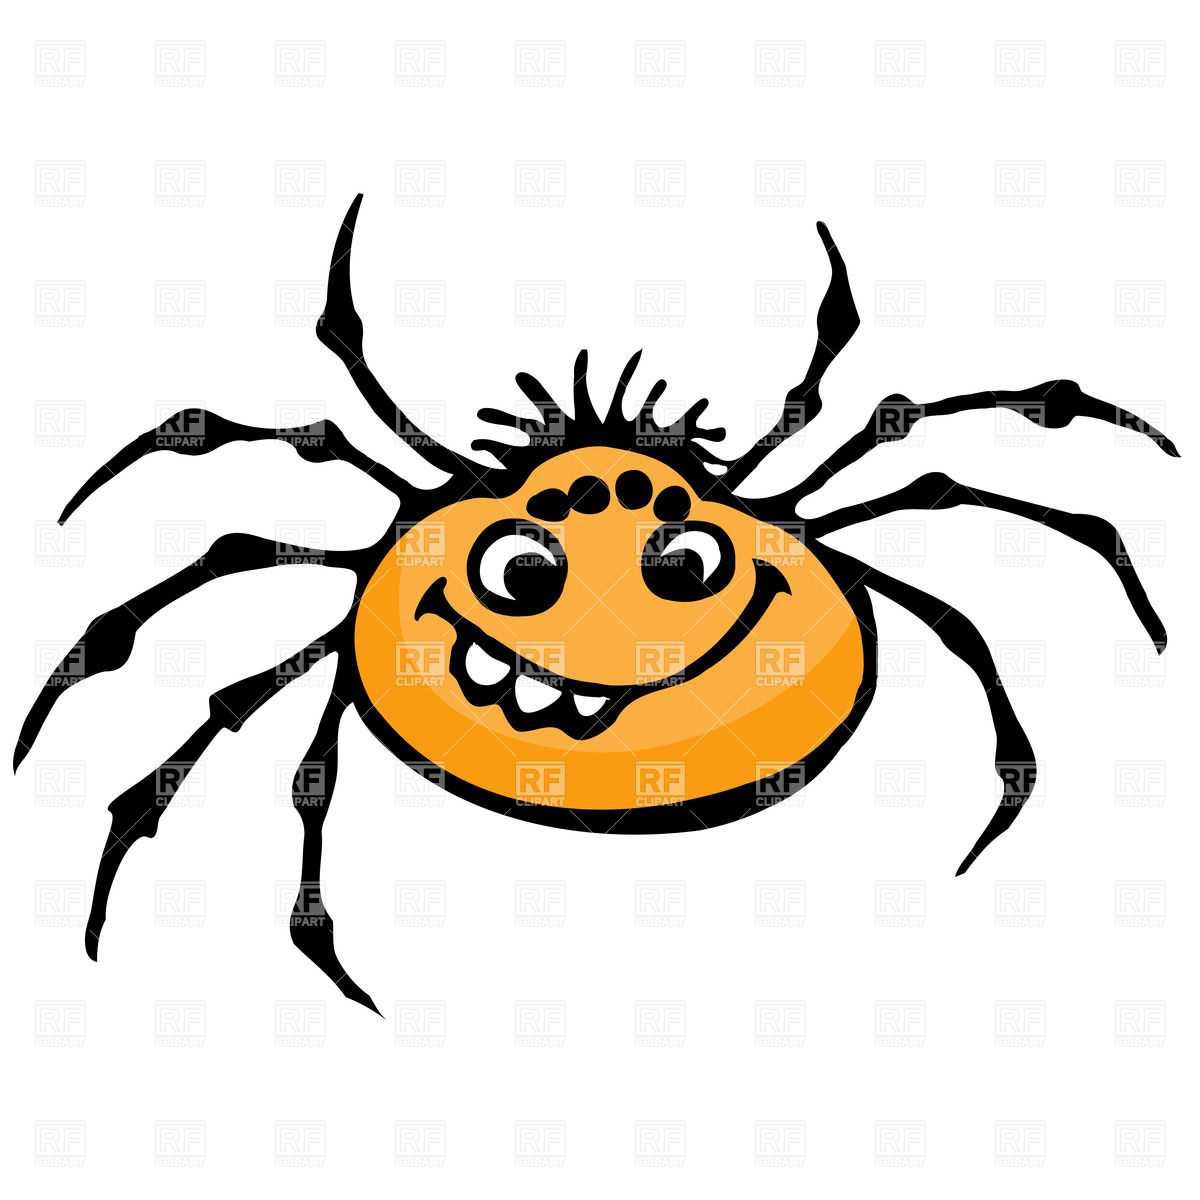 Cute Cartoon Spider Download Royalty Free Vector Clipart  Eps